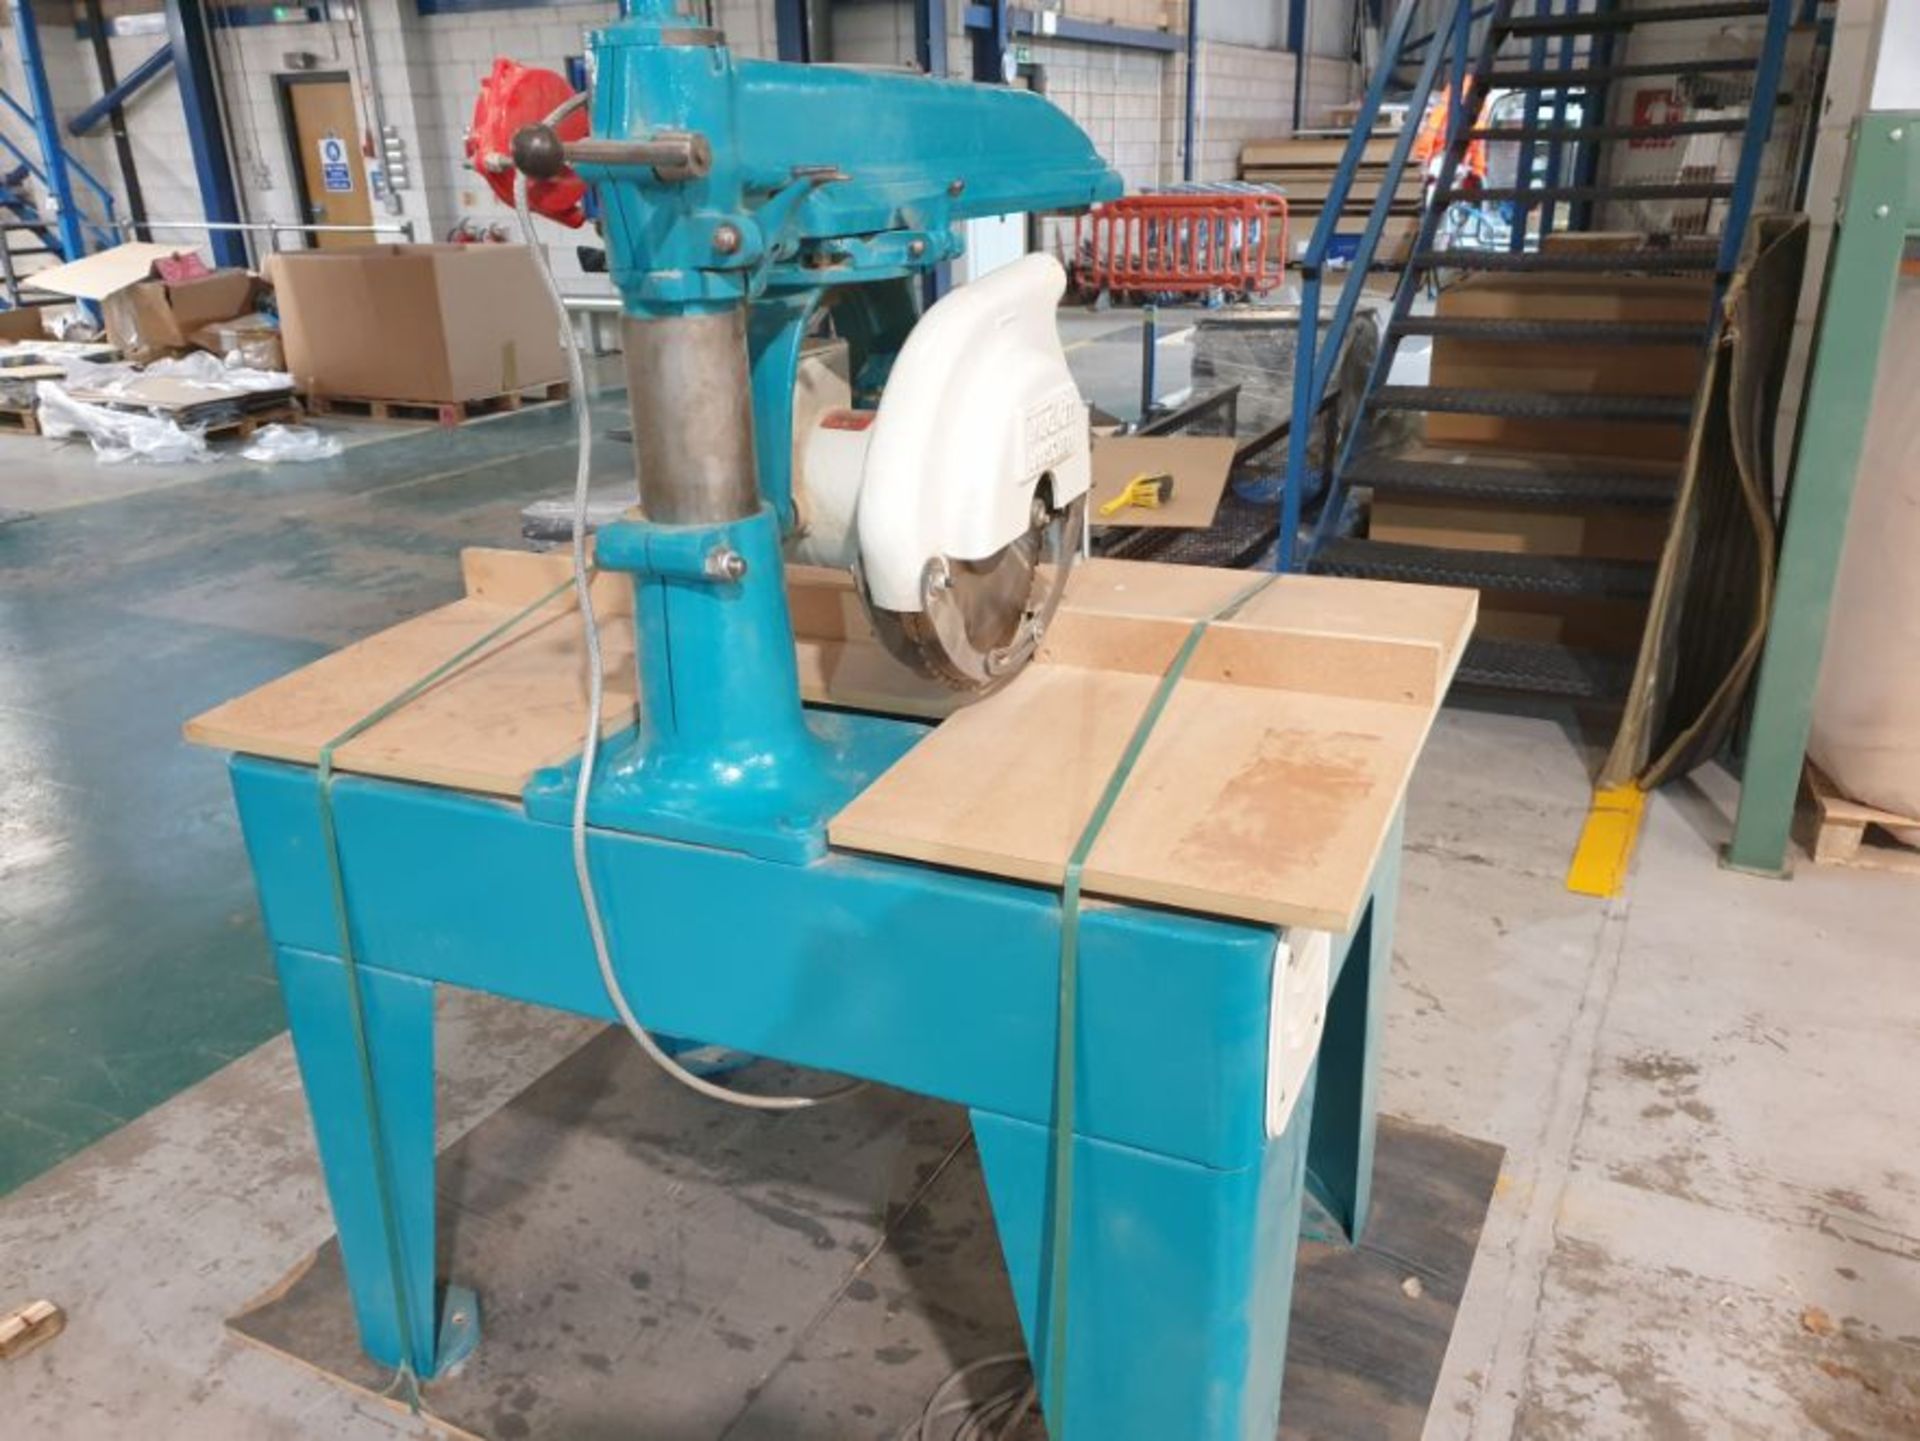 Wadkin BRA Pull Over Cross Cut Saw, Reconditioned 2019 (Located Warwick CV34 6SP) Please read the - Image 3 of 4